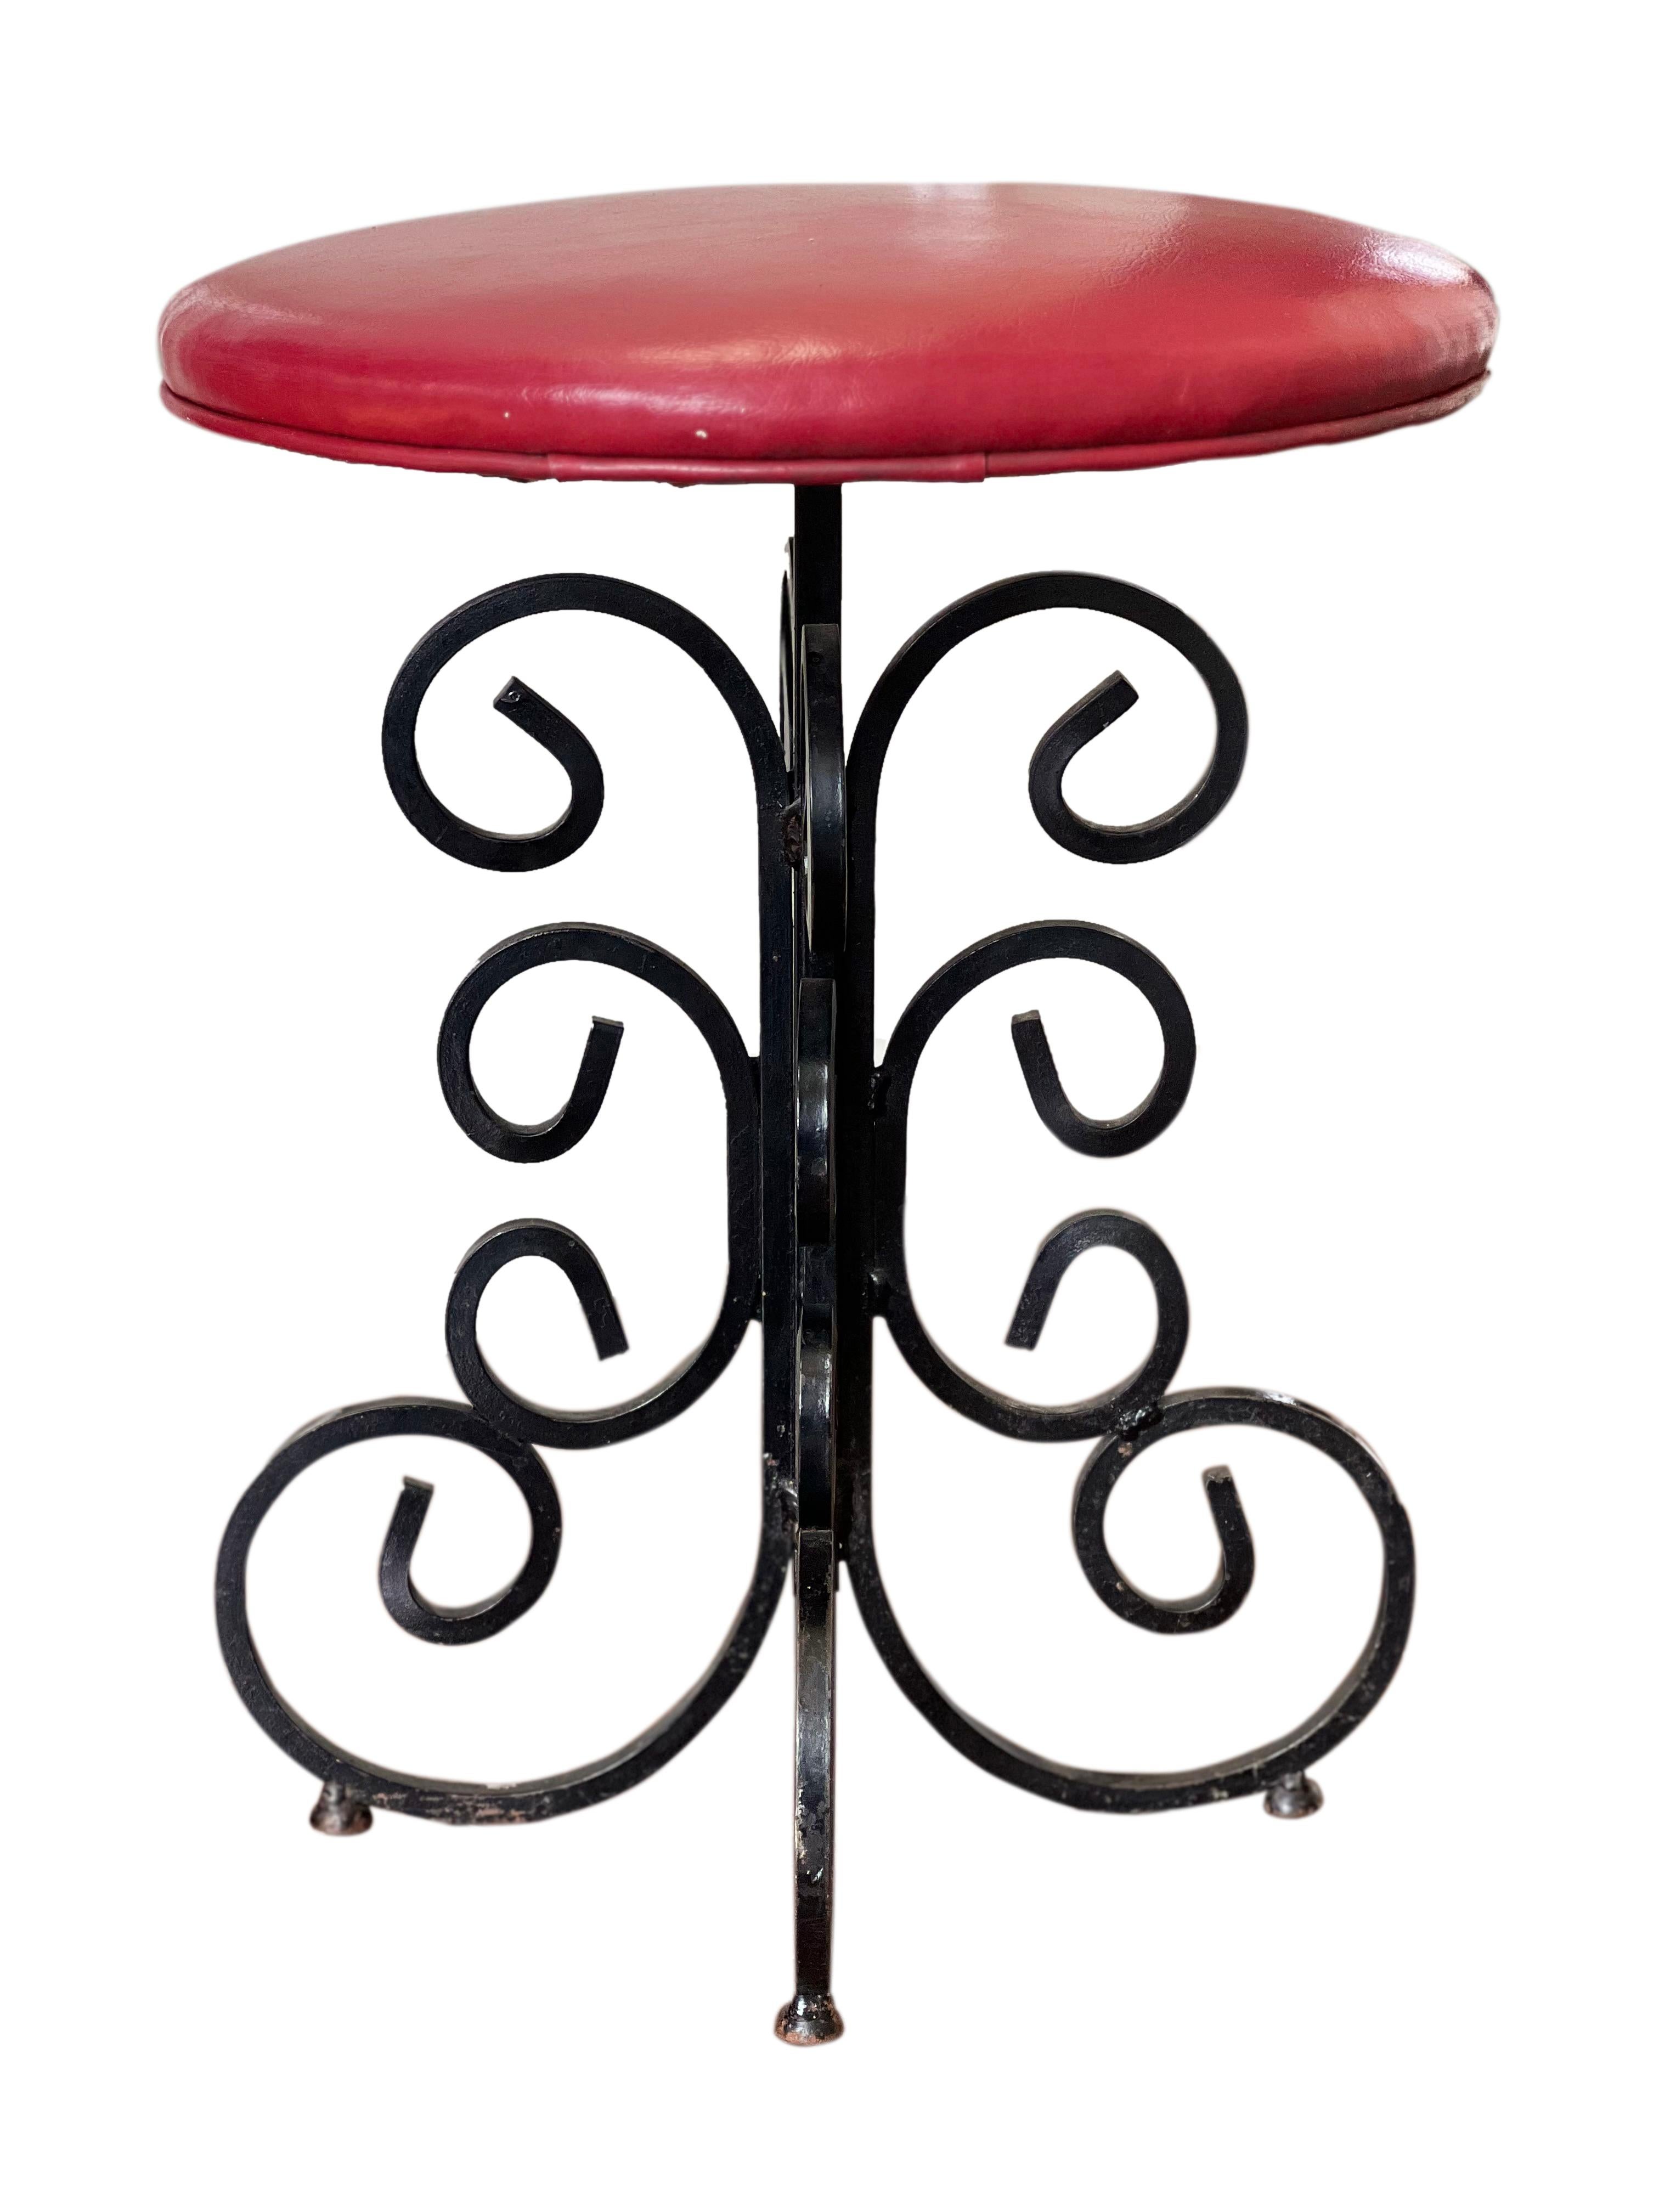 Mid century Arthur Umanoff wrought iron stools, set of 4.

The stools have lots of character with ornate scroll work. The stools are in good condition but reupholstering is recommended.  May be easily reupholstered in your fabric of choice. Perfect